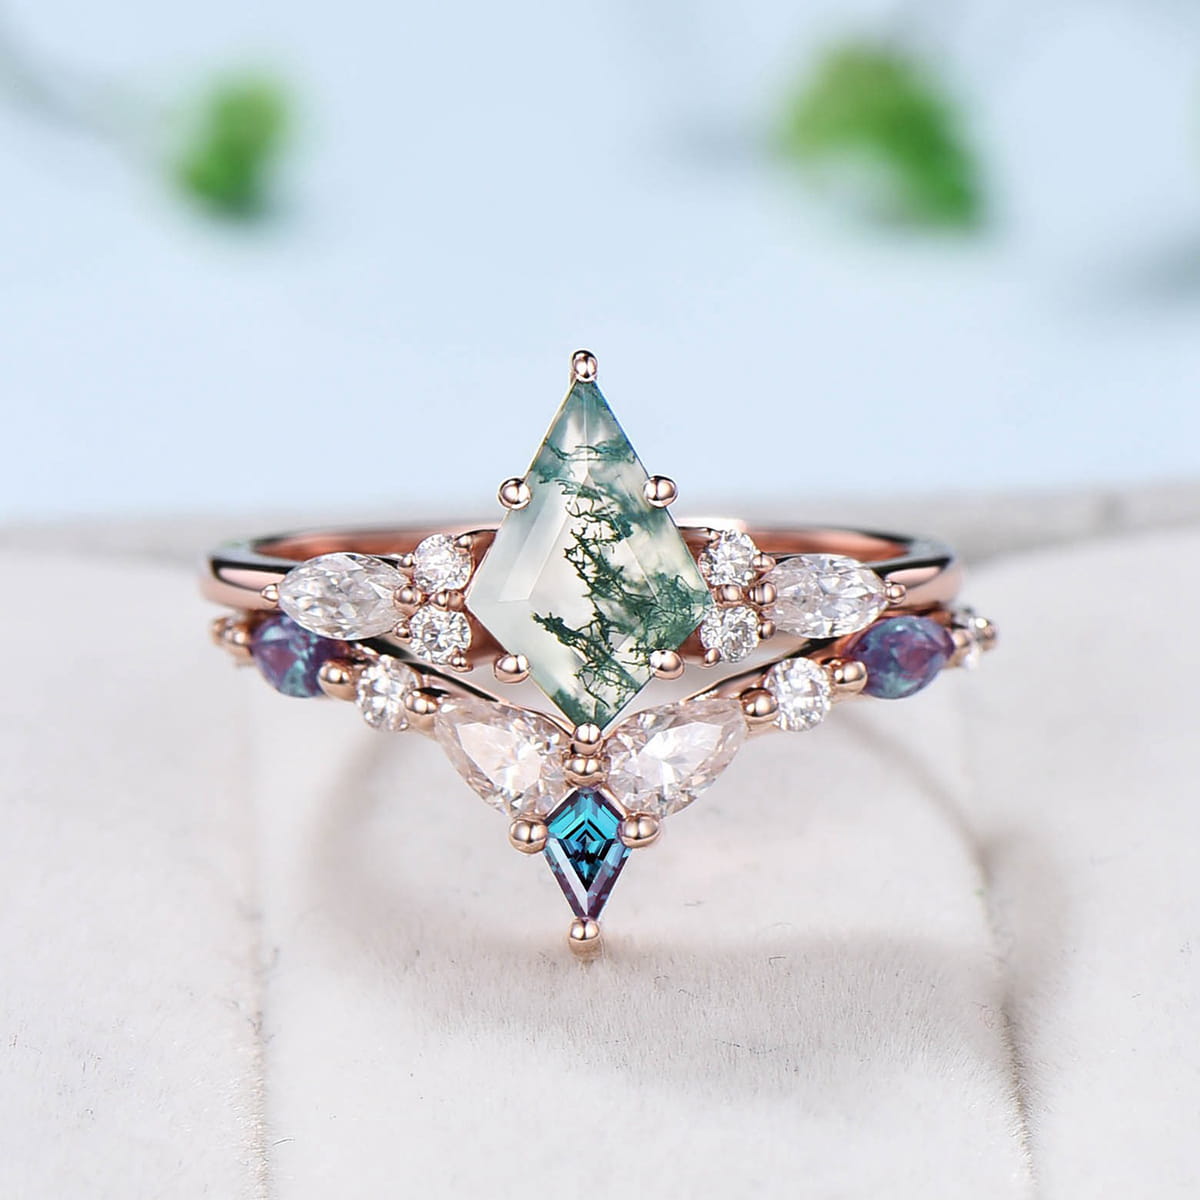 Vintage moss agate ring rose gold unique Kite cut aquatic agate engagement ring cluster alexandrite moissanite gold bridal wedding ring set - PENFINE